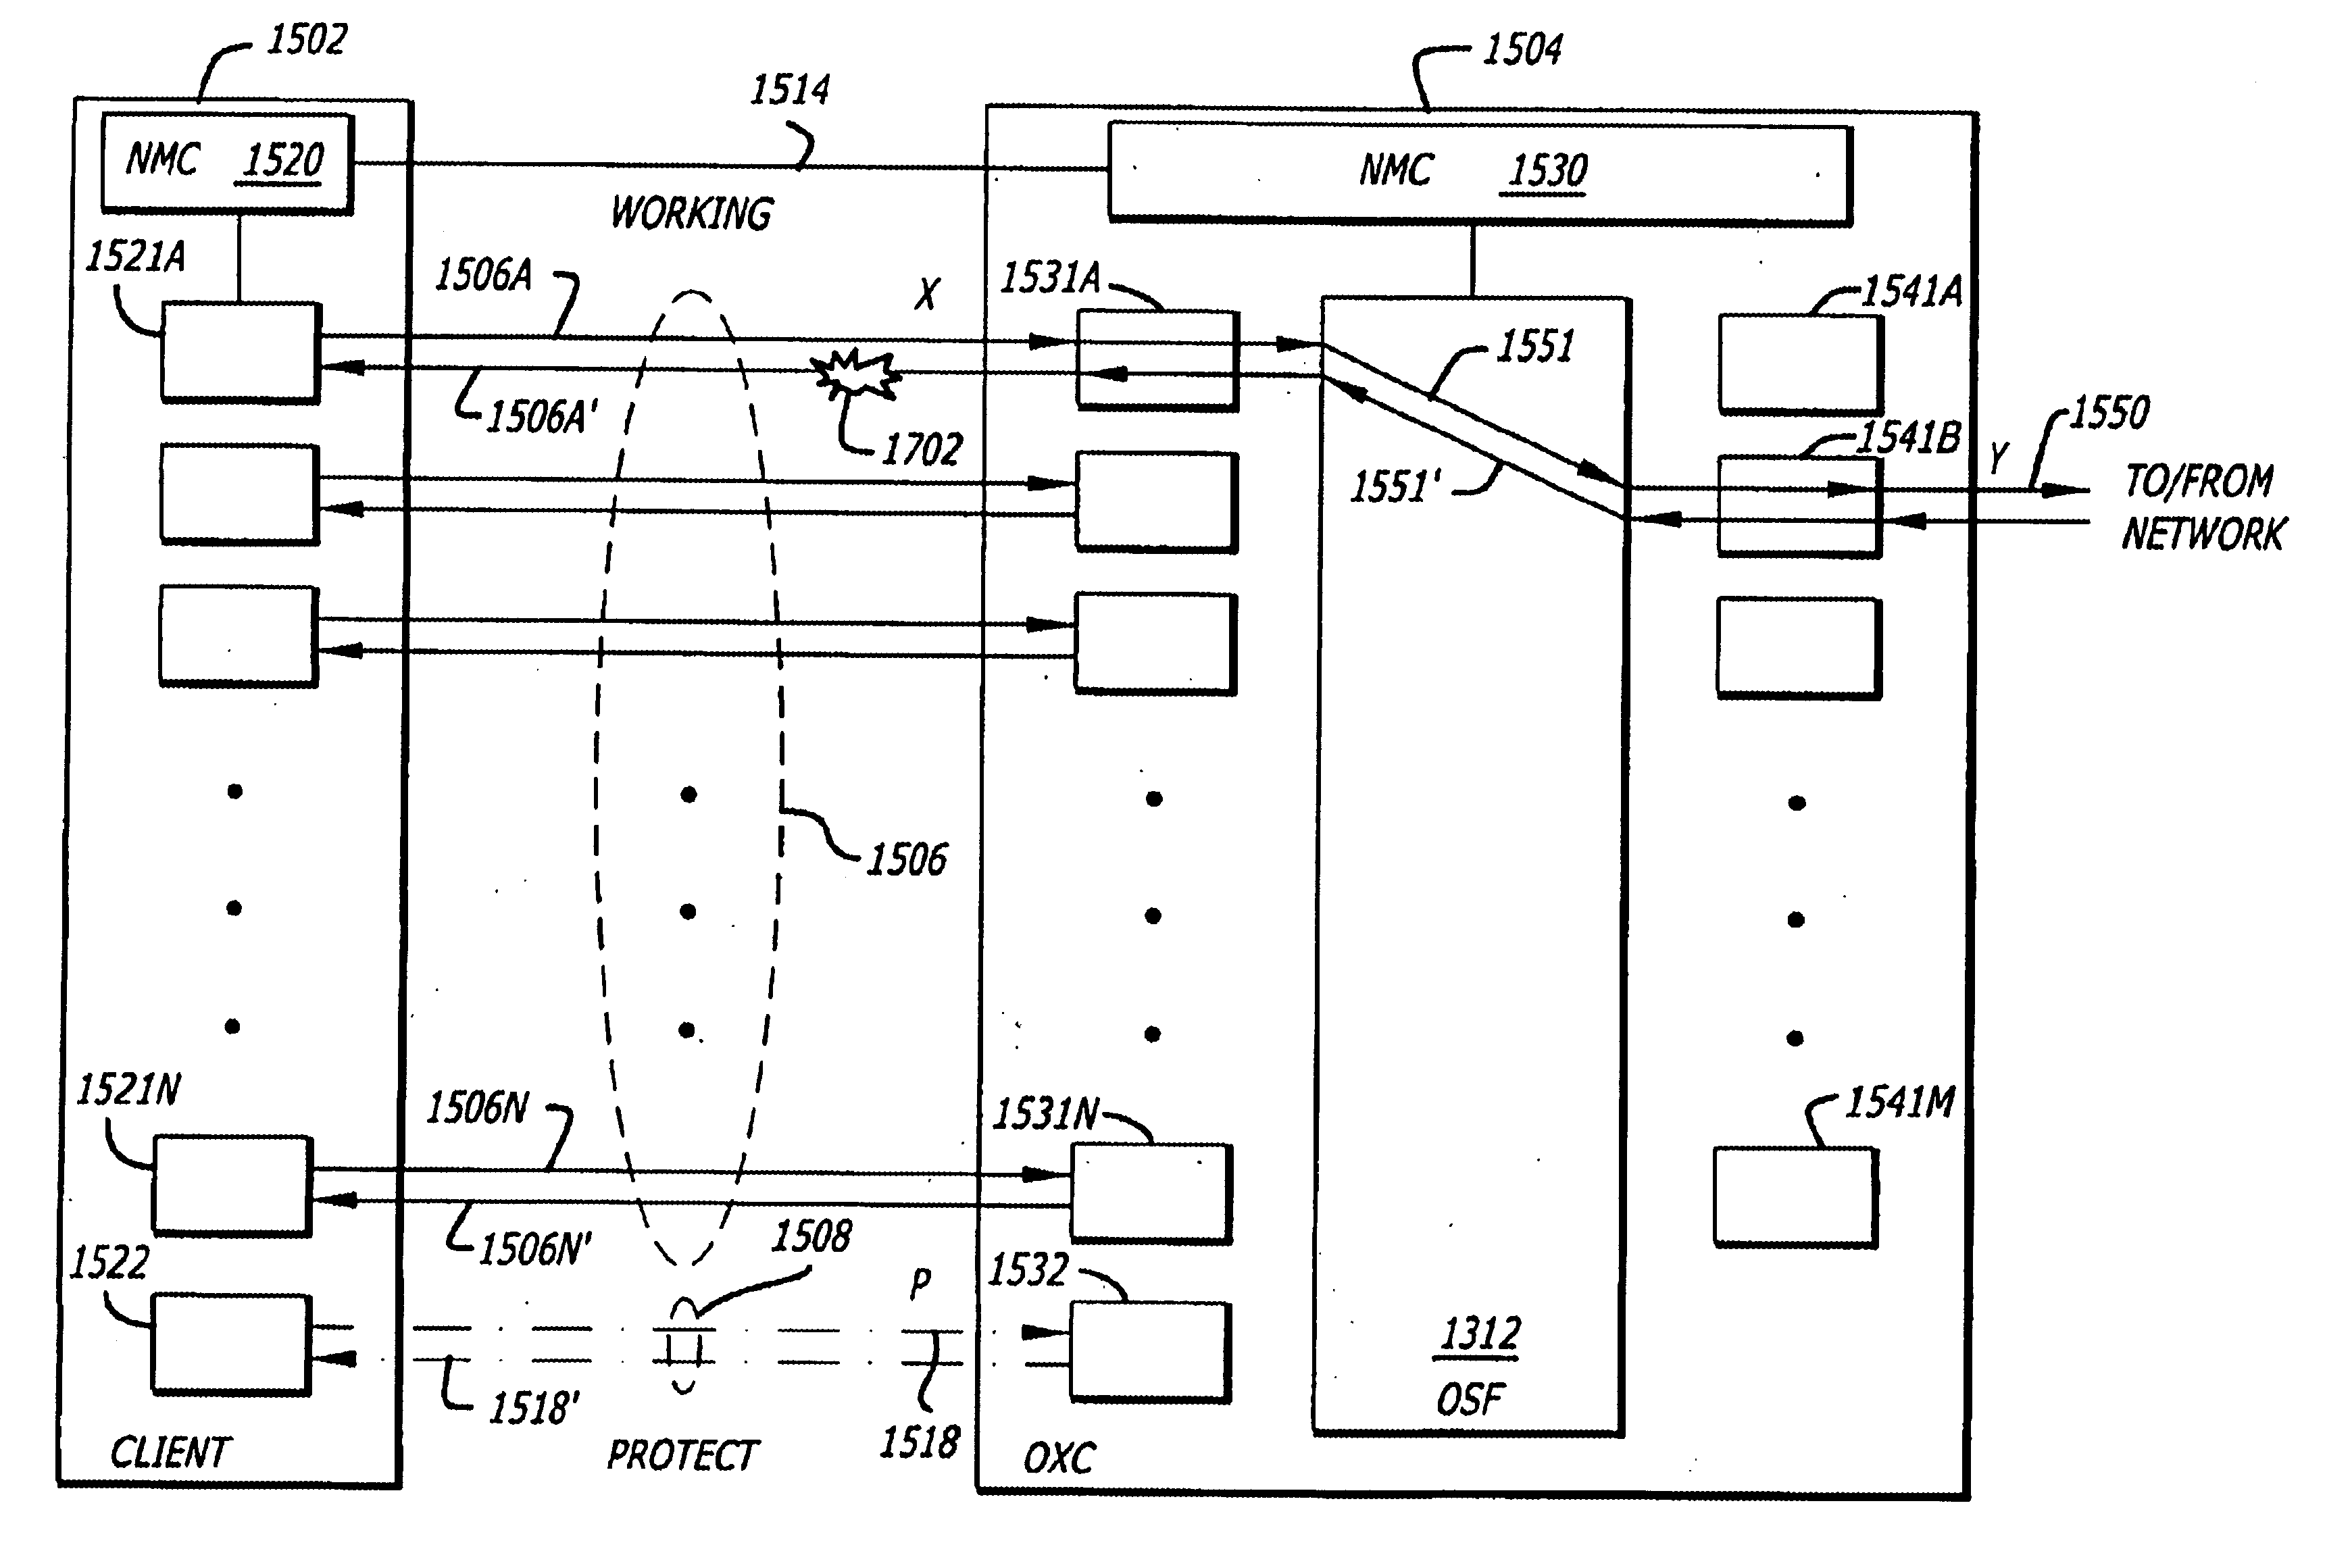 Connection protection between clients and optical cross-connect switches